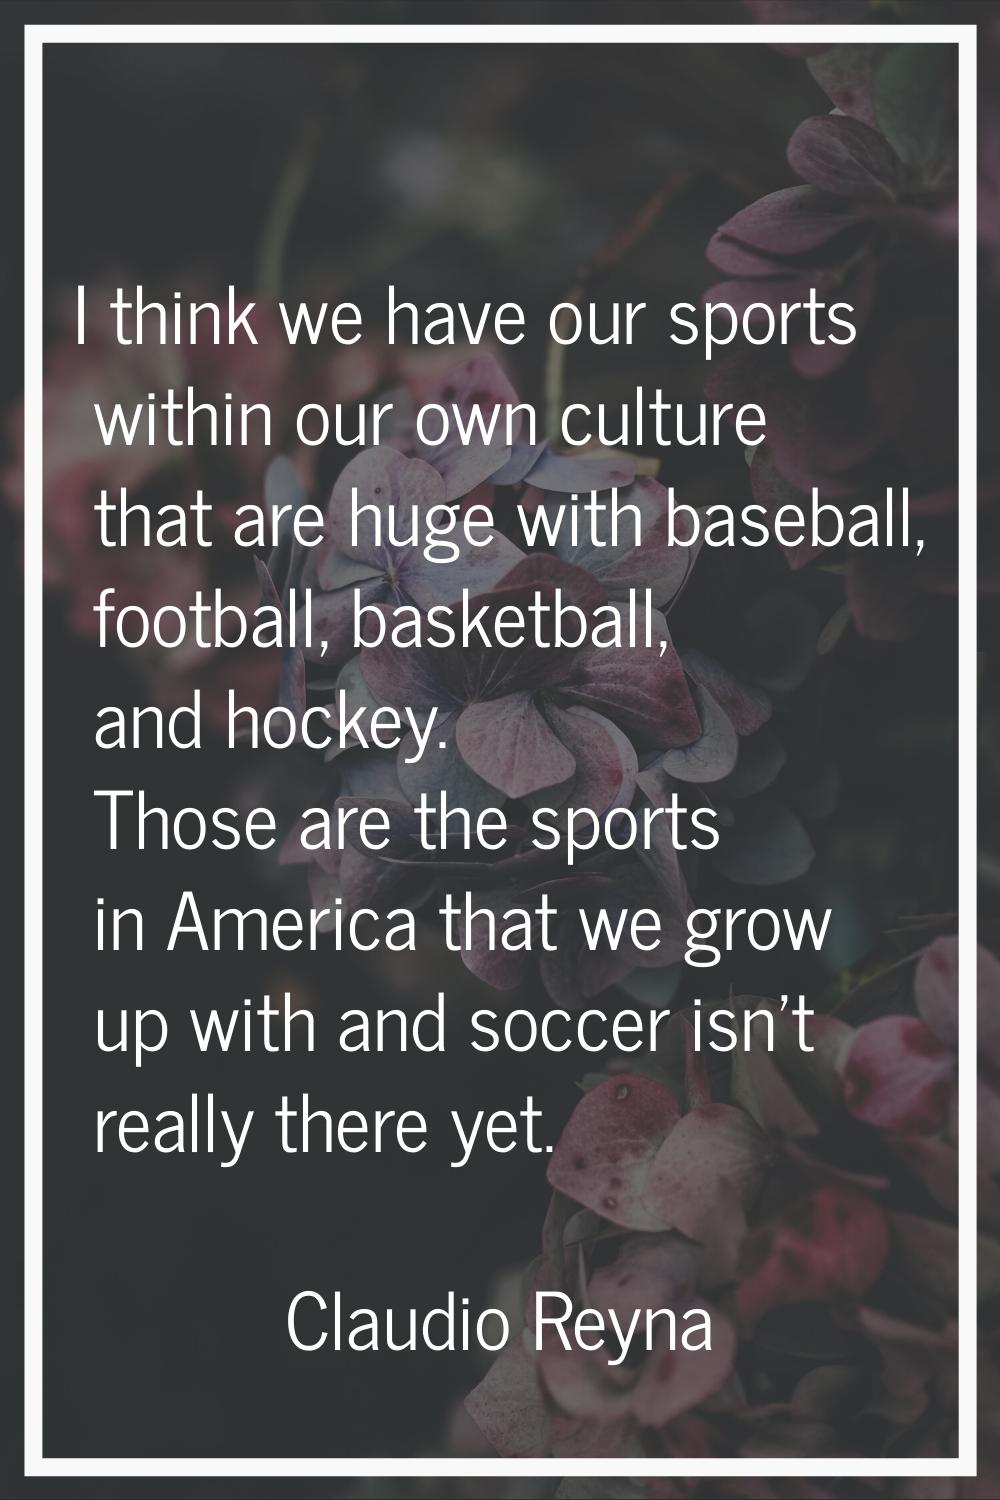 I think we have our sports within our own culture that are huge with baseball, football, basketball